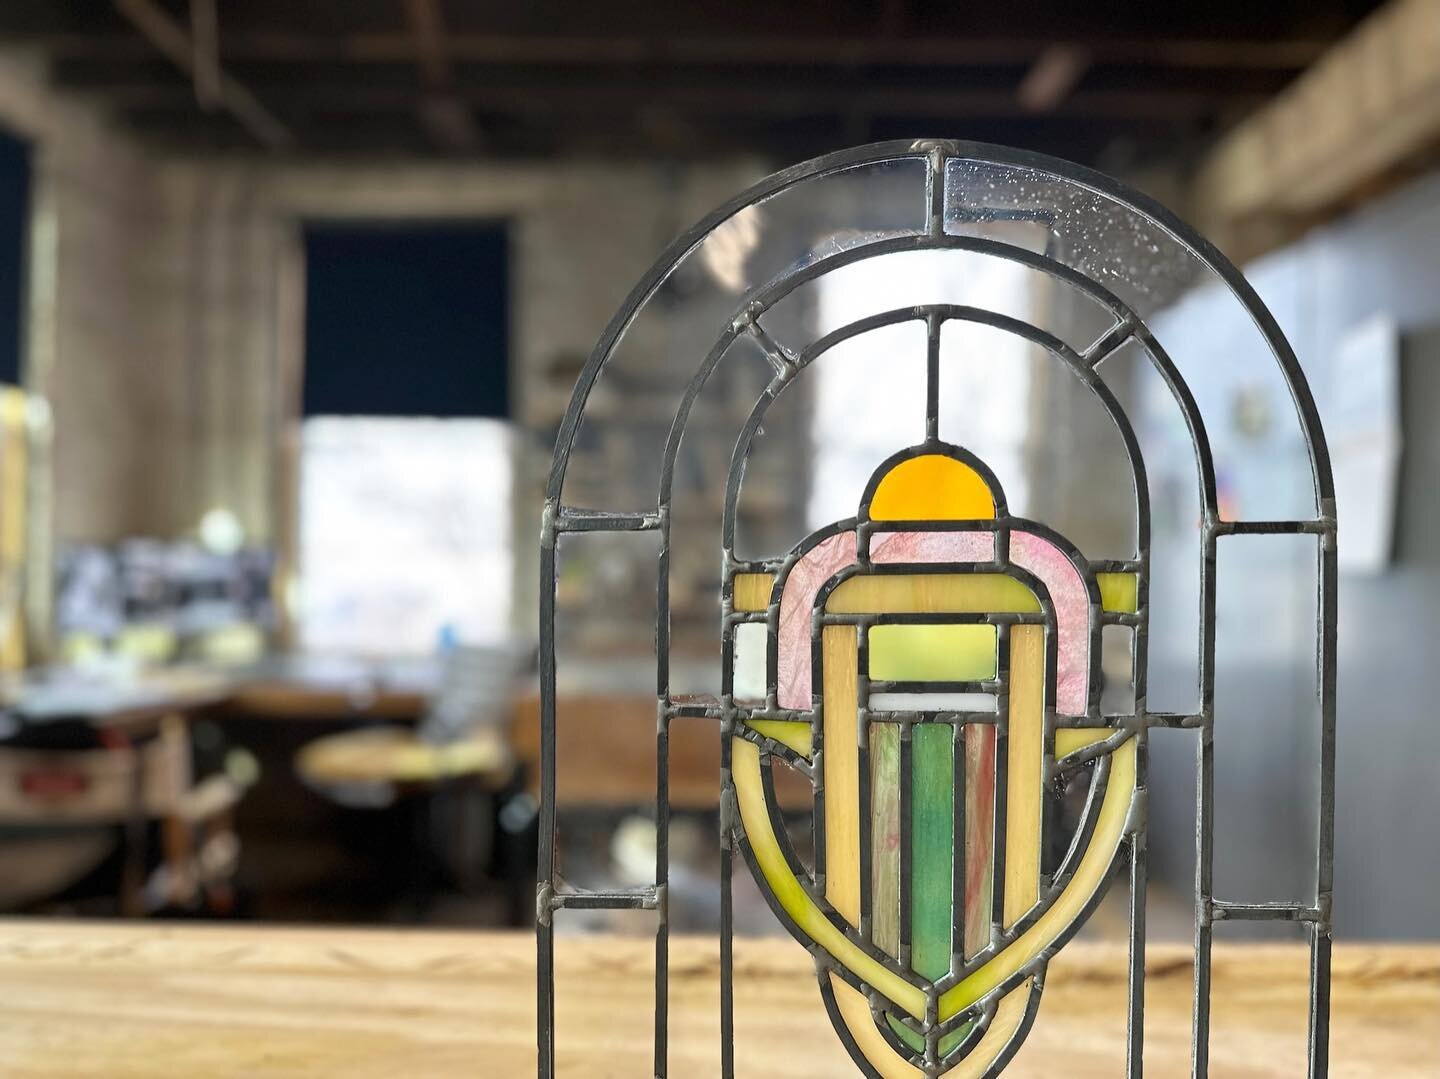 This art deco inspired piece will be up for auction at Saint Mary&rsquo;s roaring 20&rsquo;s themed annual Gala this weekend! 

#stainedglass #customstainedglass #columbusohio #germanvillage #saintmarysschool